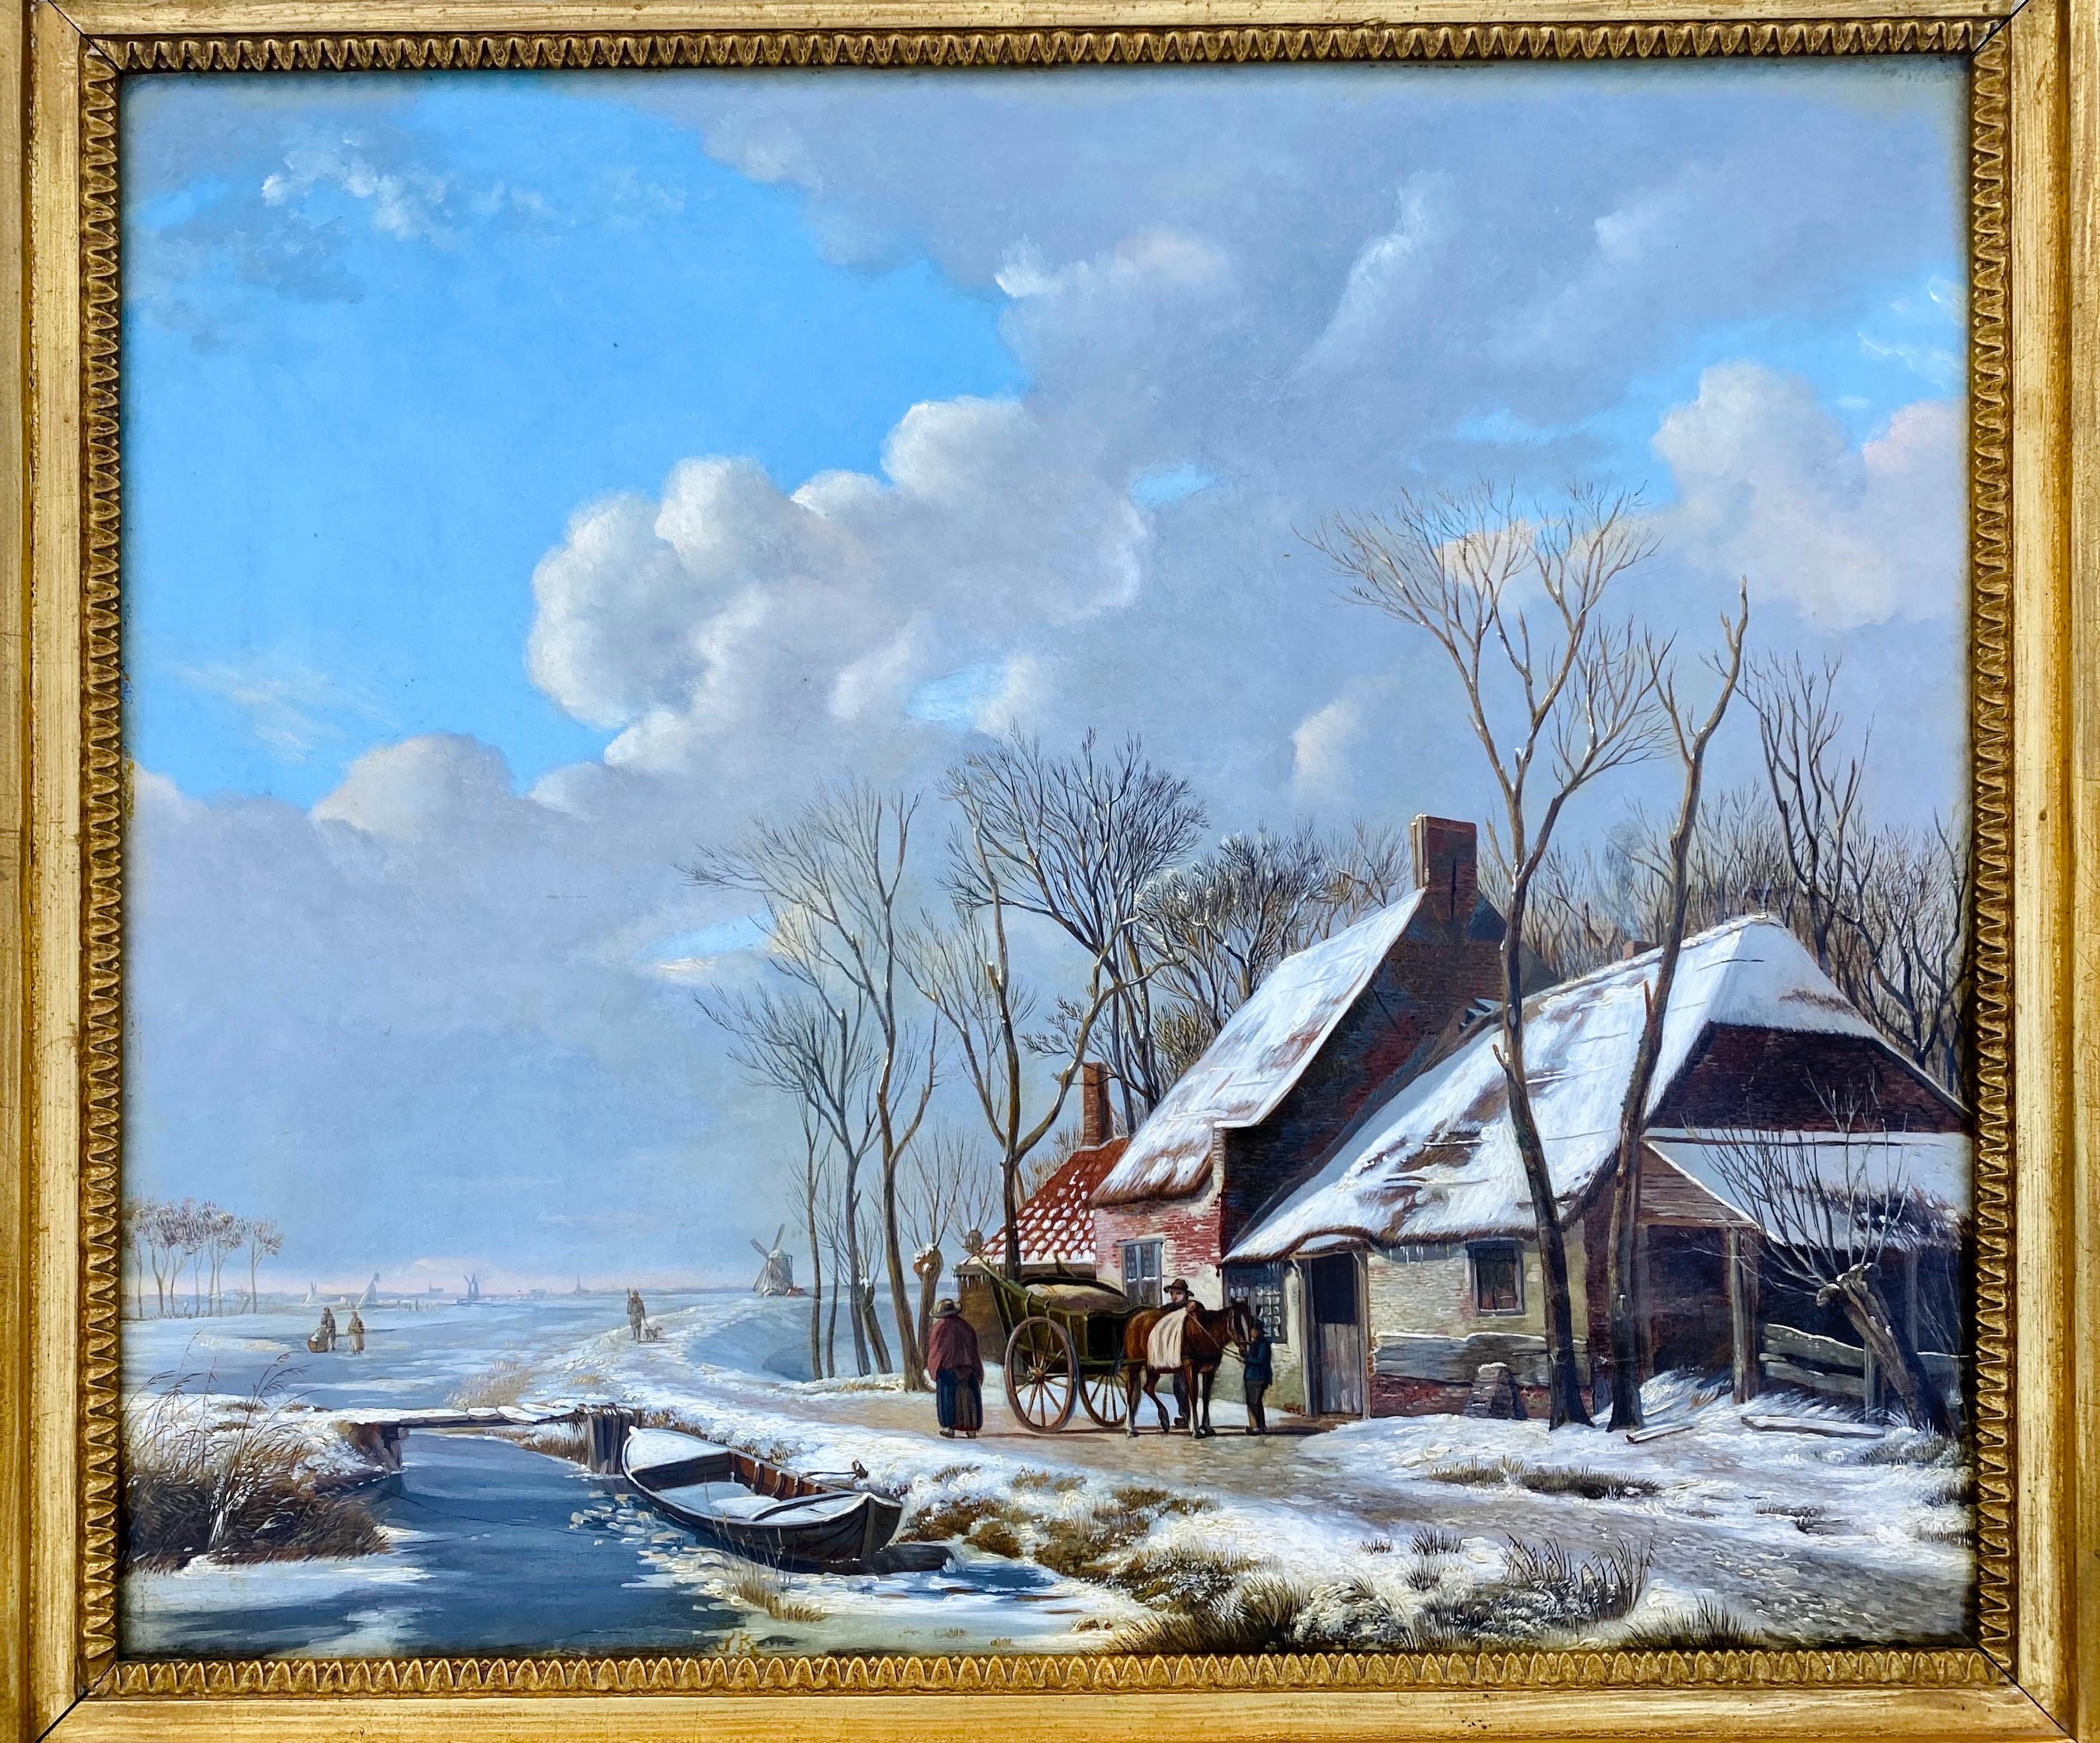 19th century Dutch oil painting of a sunny winter Landscape - Genre Figurative - Painting by Johan Adolph Rust